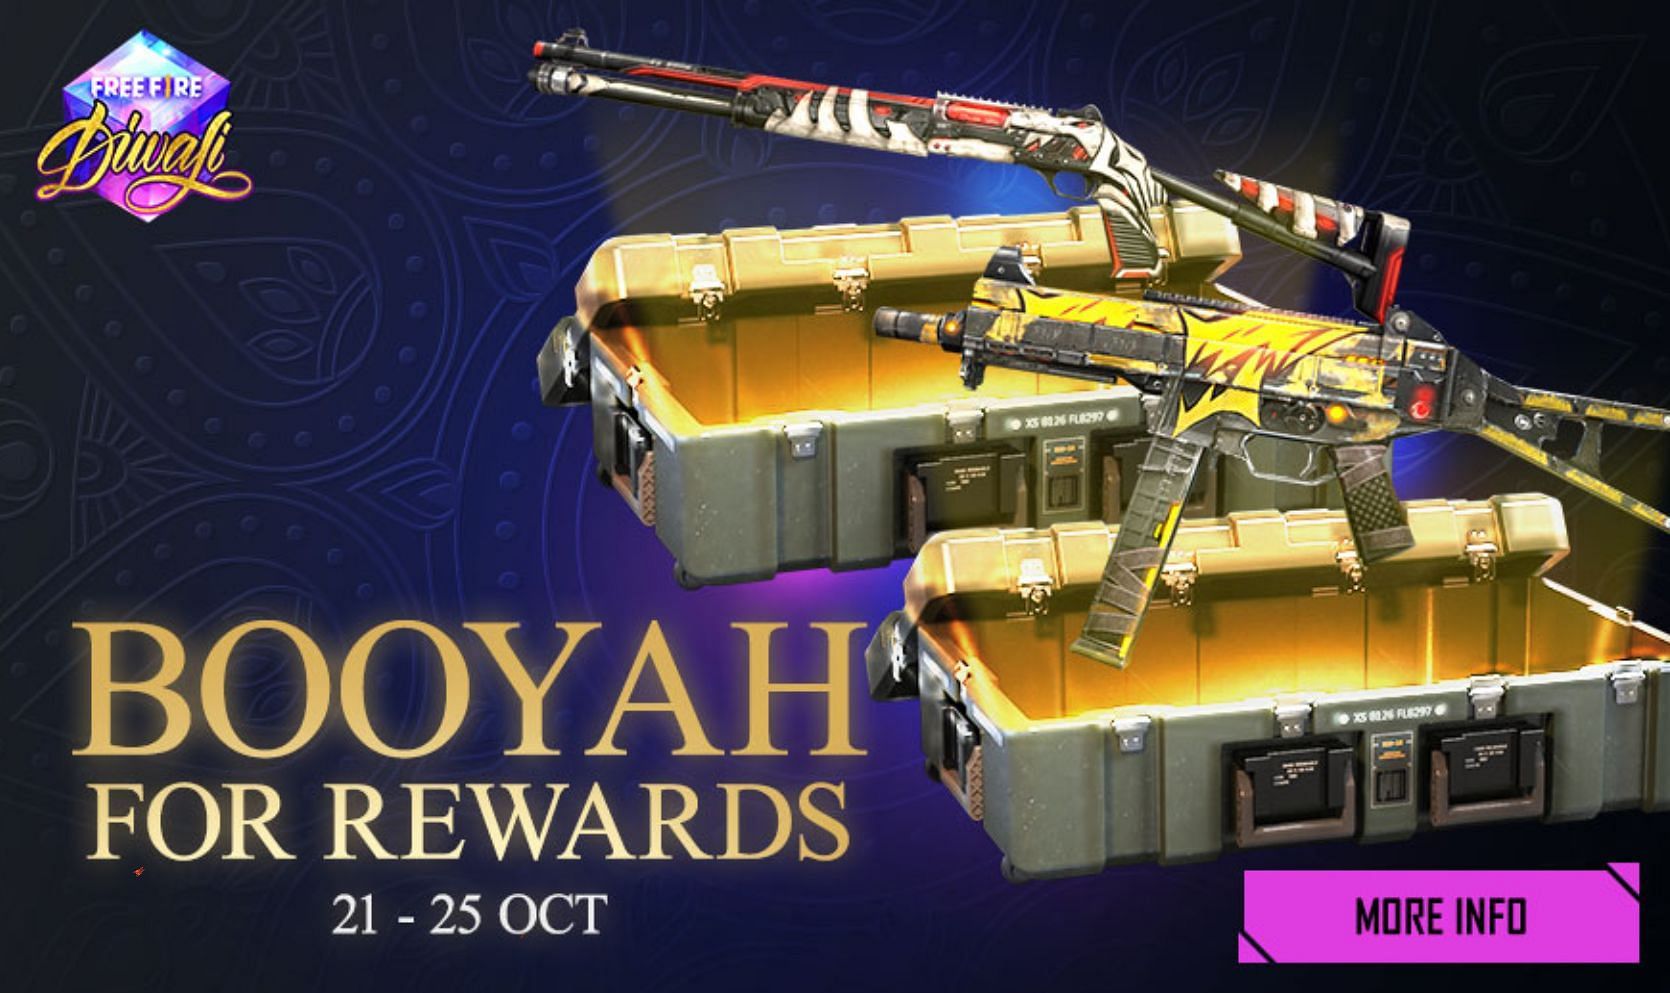 Booyah for Rewards event will offer rewards to players until 25 October (Image via Free Fire)